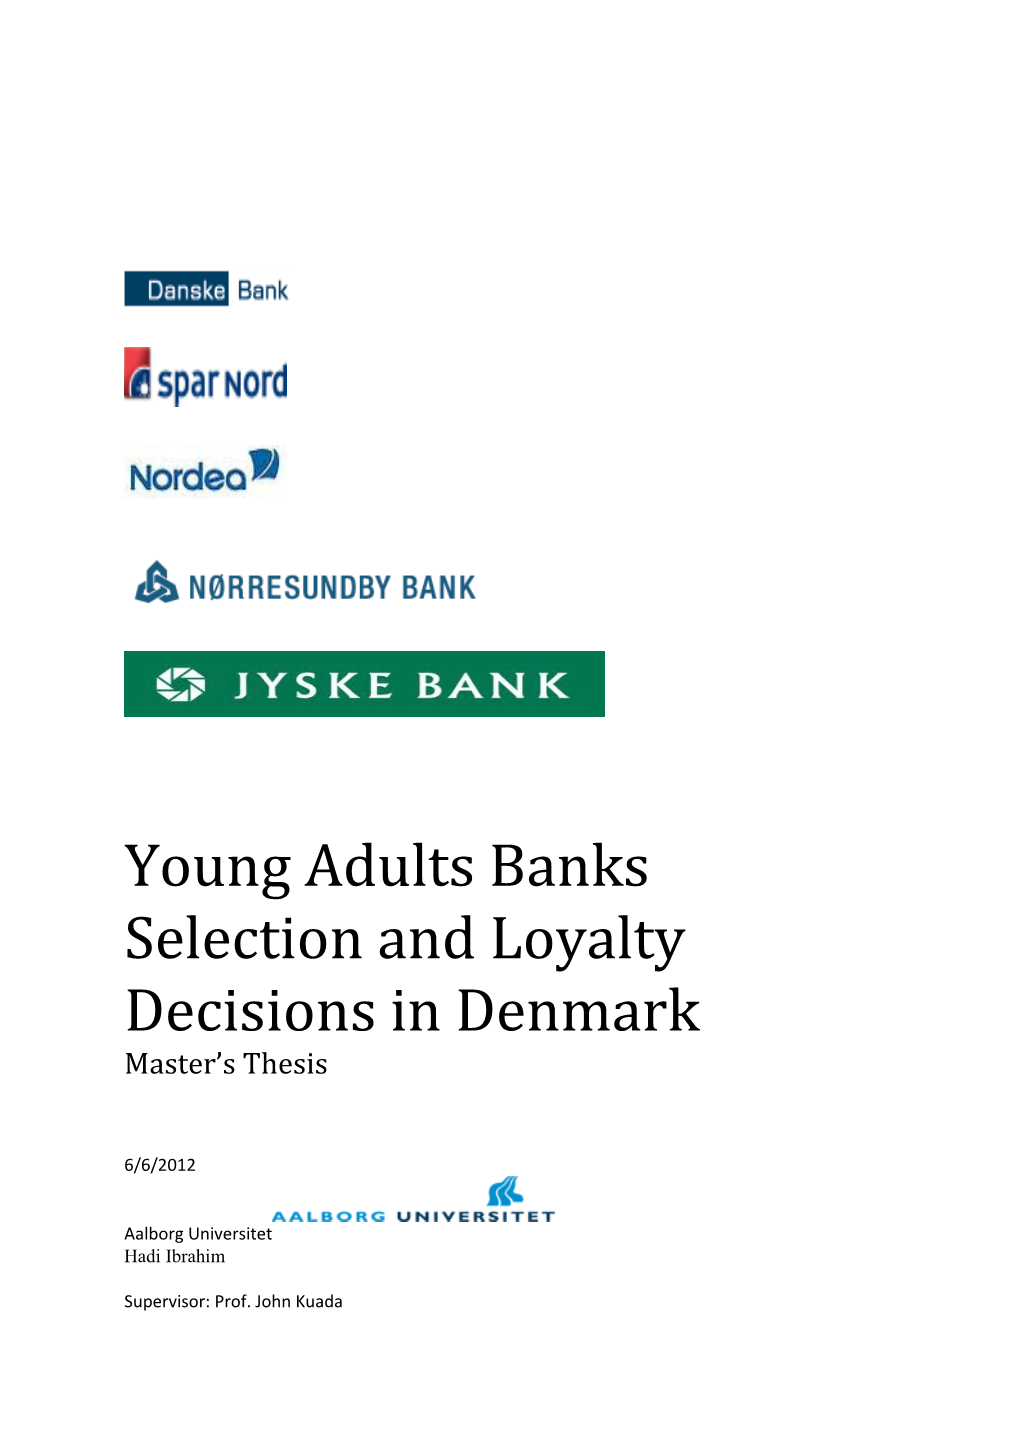 Young Adults Banks Selection and Loyalty Decisions in Denmark